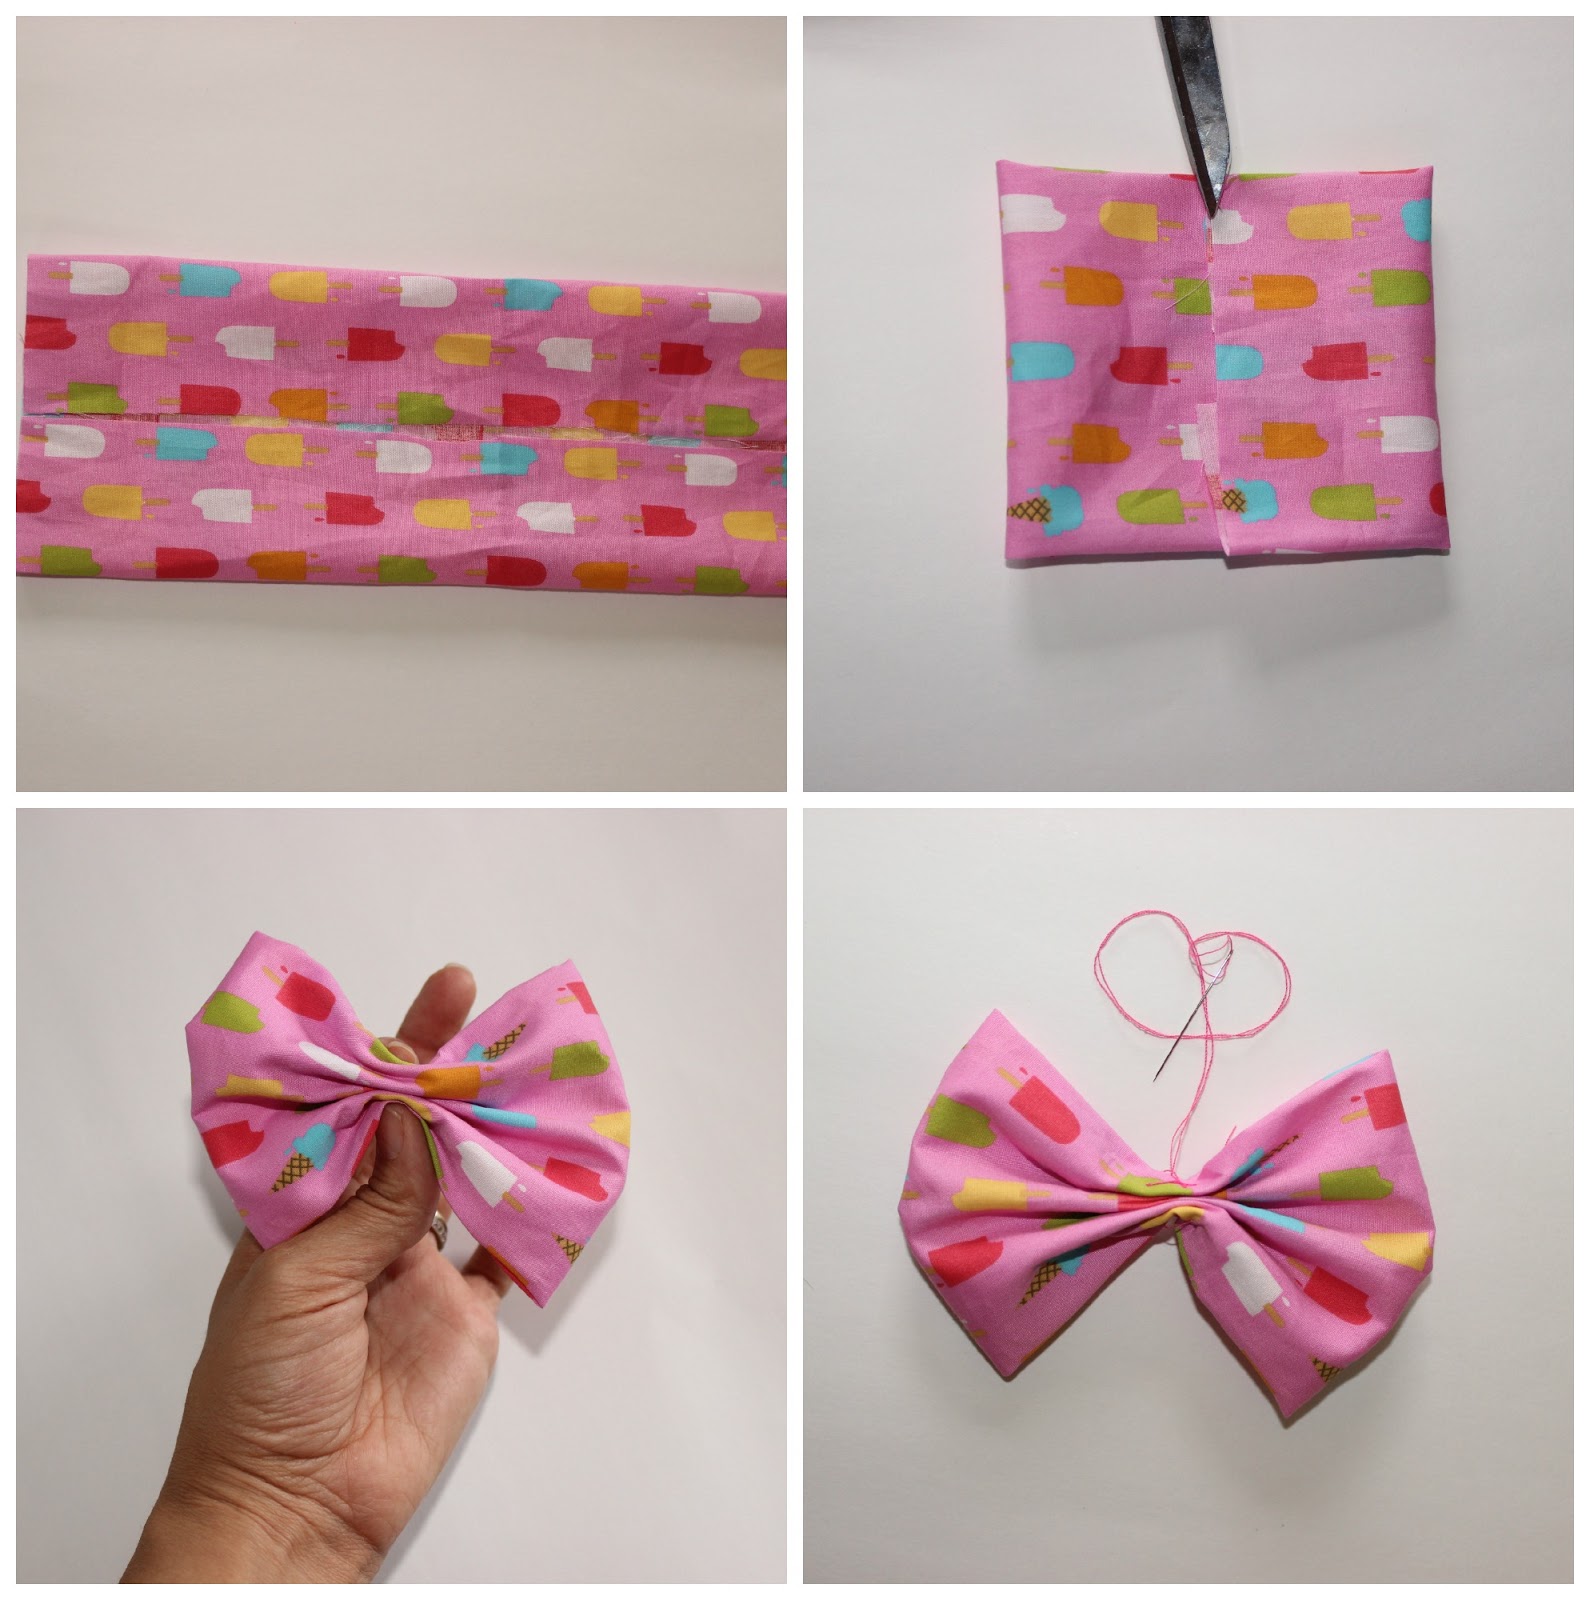 life with les deux: DIY Hair Bow or Bow Tie Tutorial